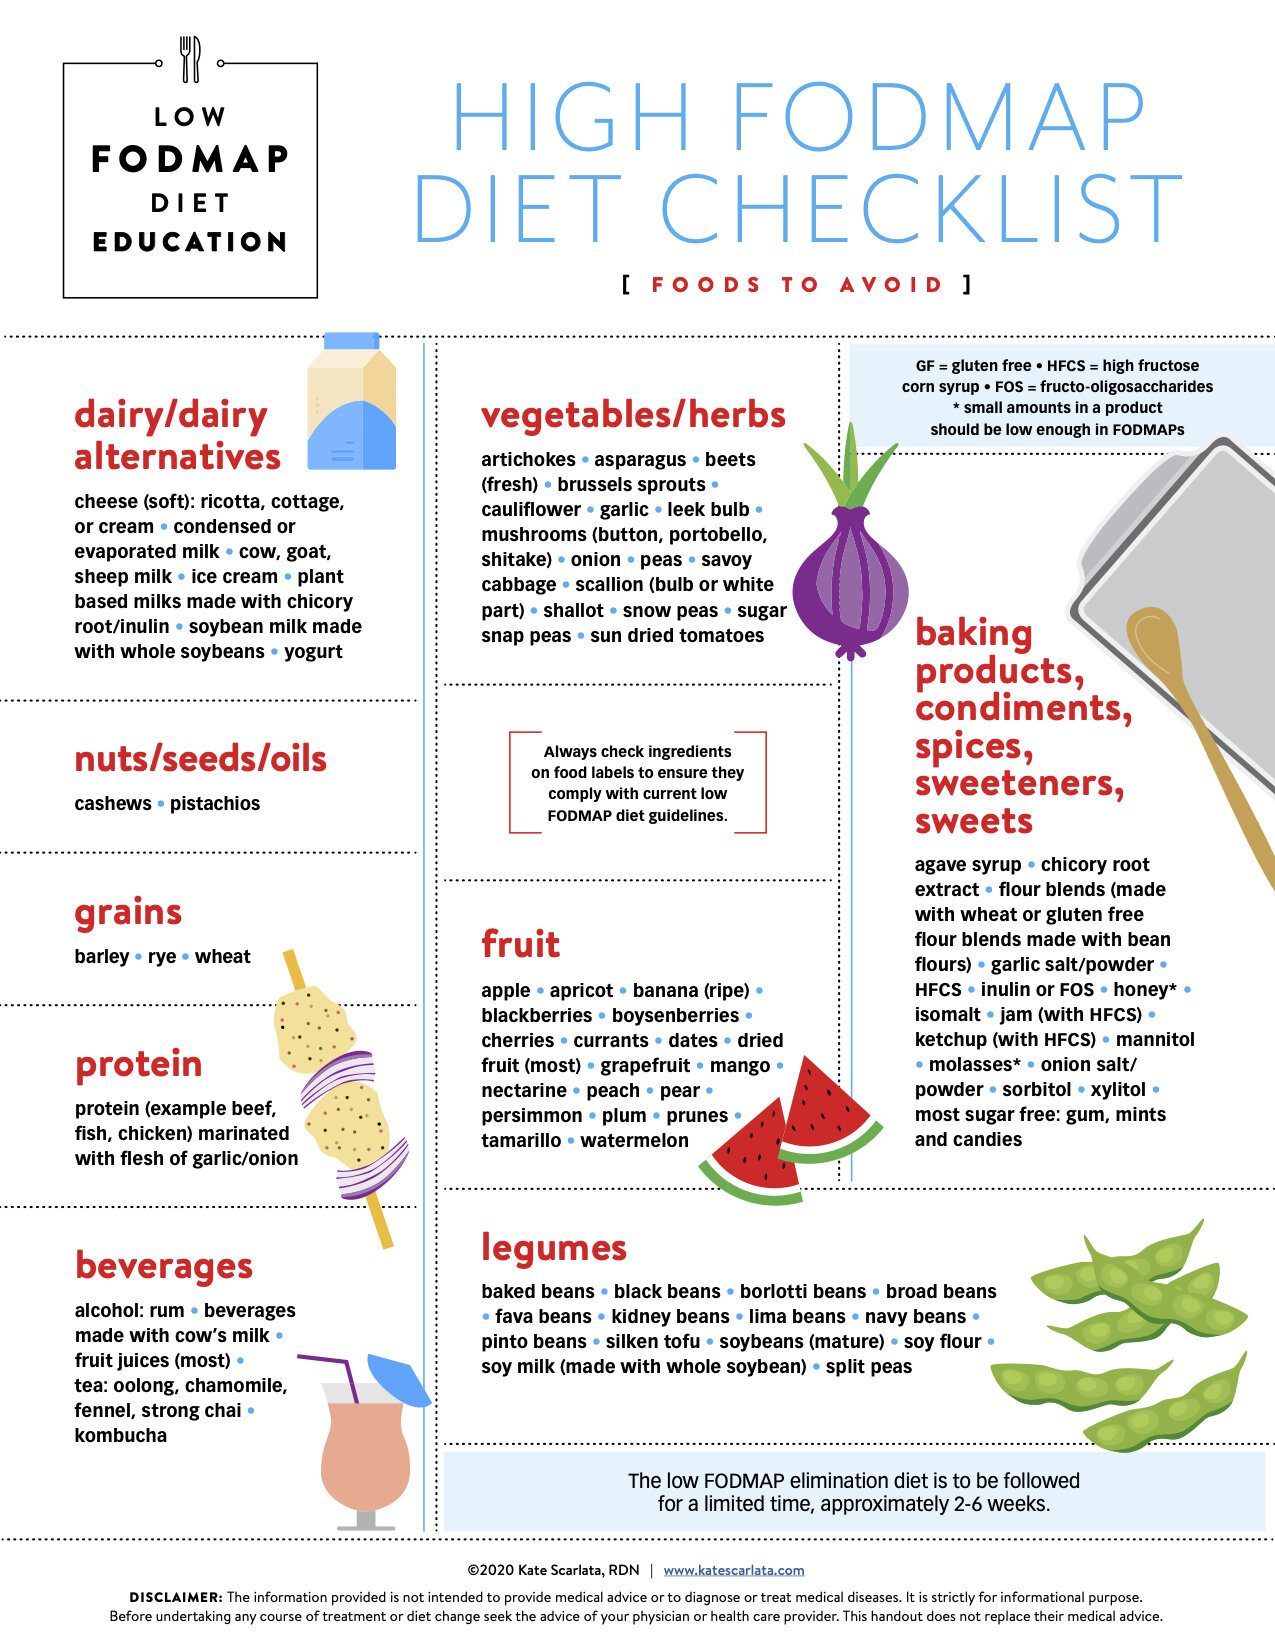 low and high fodmap diet checklists kate scarlata rdn